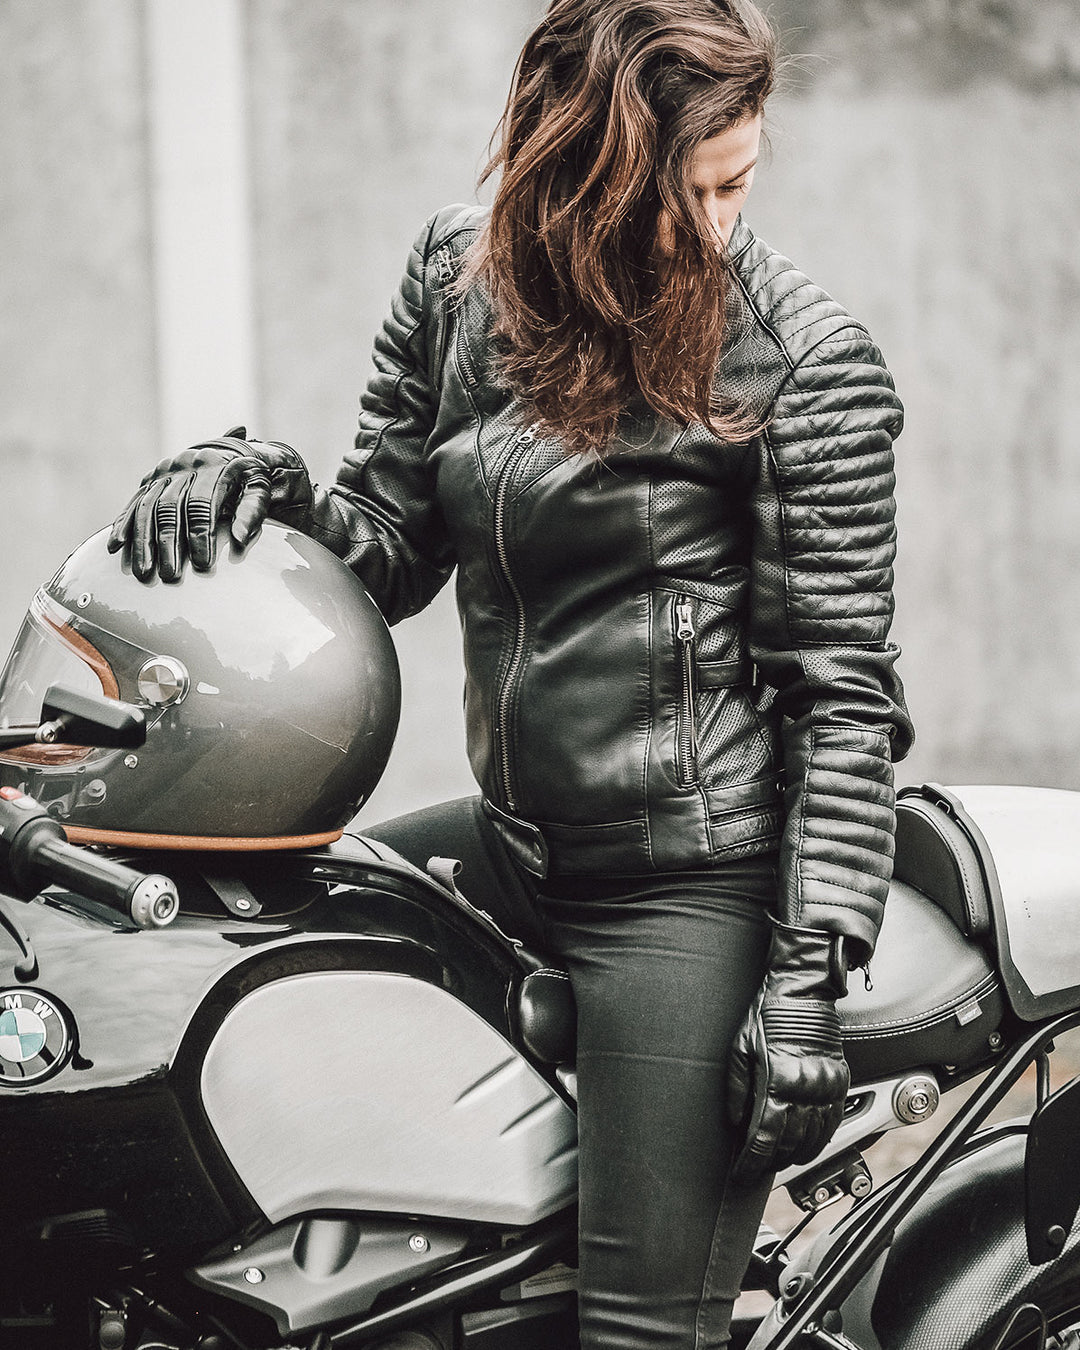 A woman on a motorcycle wearing Women&#39;s black leather motorcycle jacket modern classic style from Black arrow label